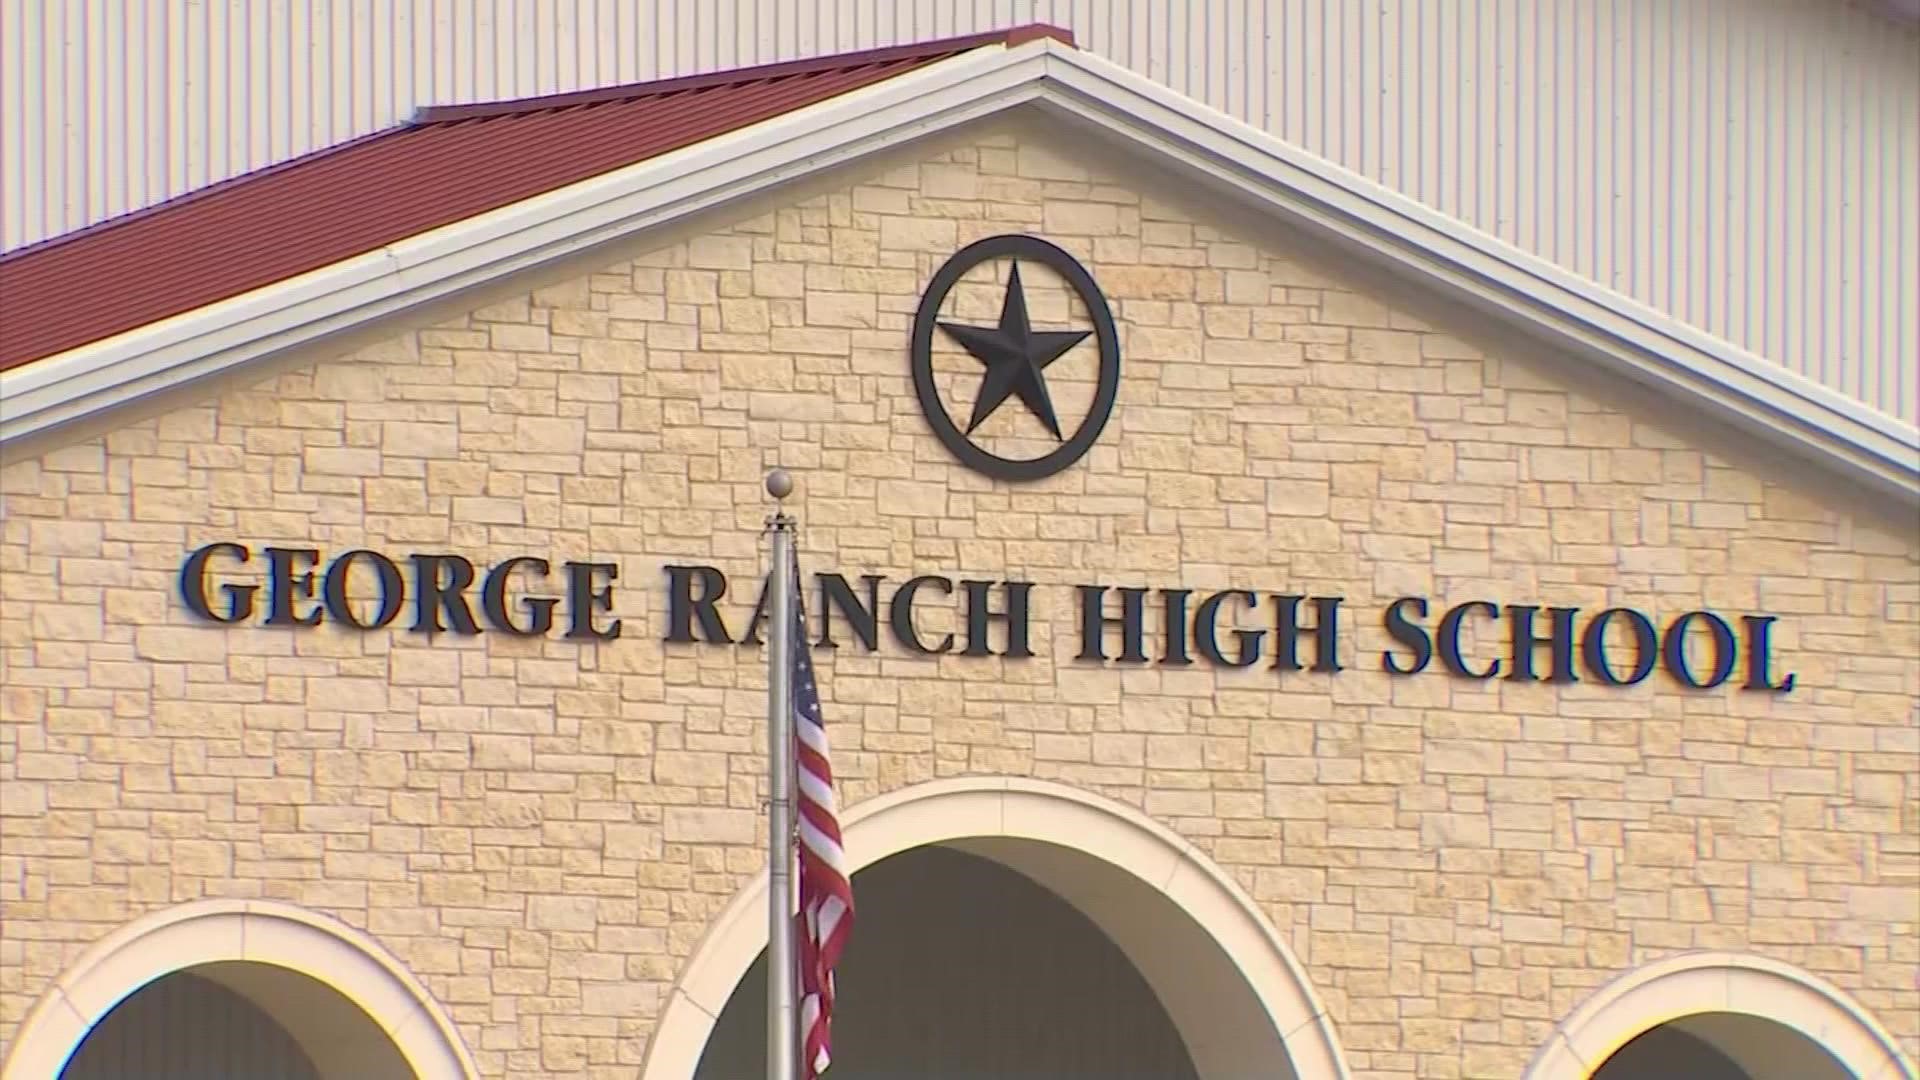 Three students were detained after calling in a fake active shooter threat at George Ranch High School, according to Lamar CISD officials.